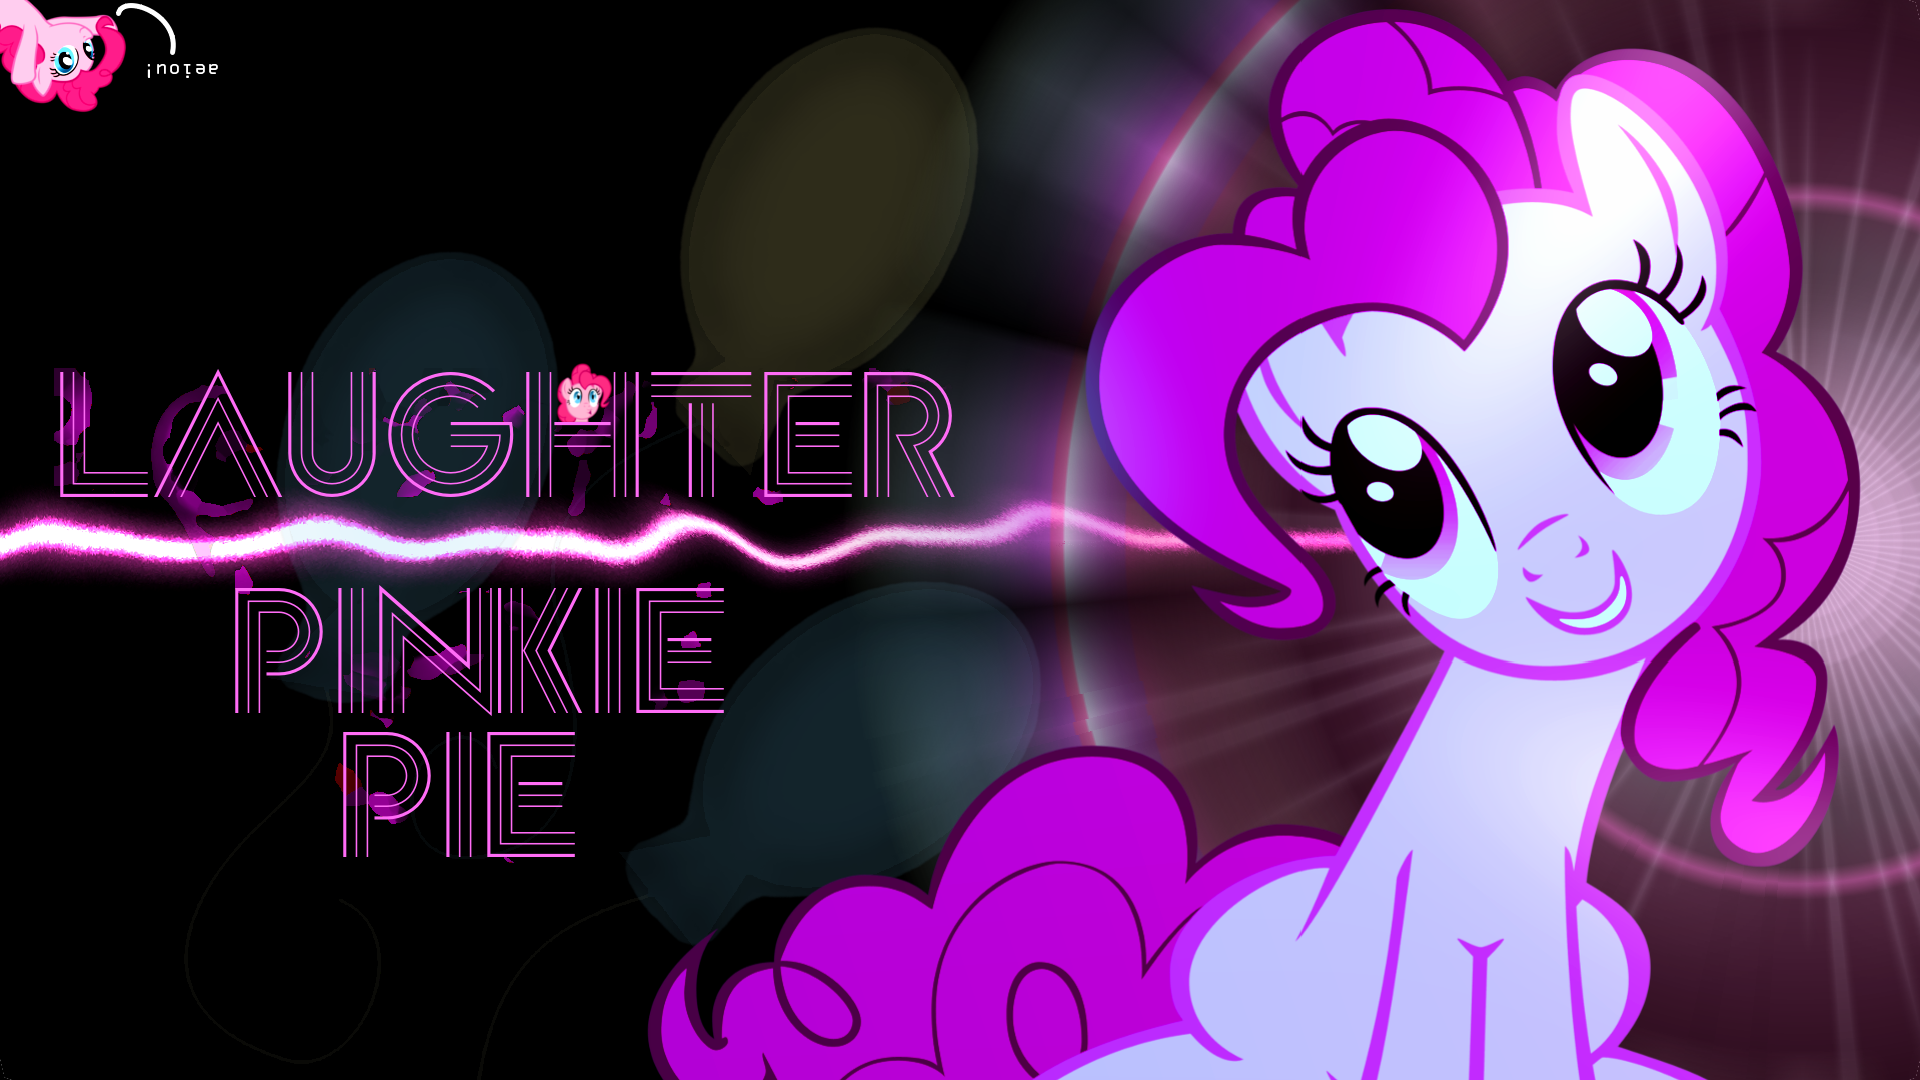 Shiny-shiny pretty lights wallpaper pack. by AtomicGreymon, BlackGryph0n, Clueless313 and dropletx1